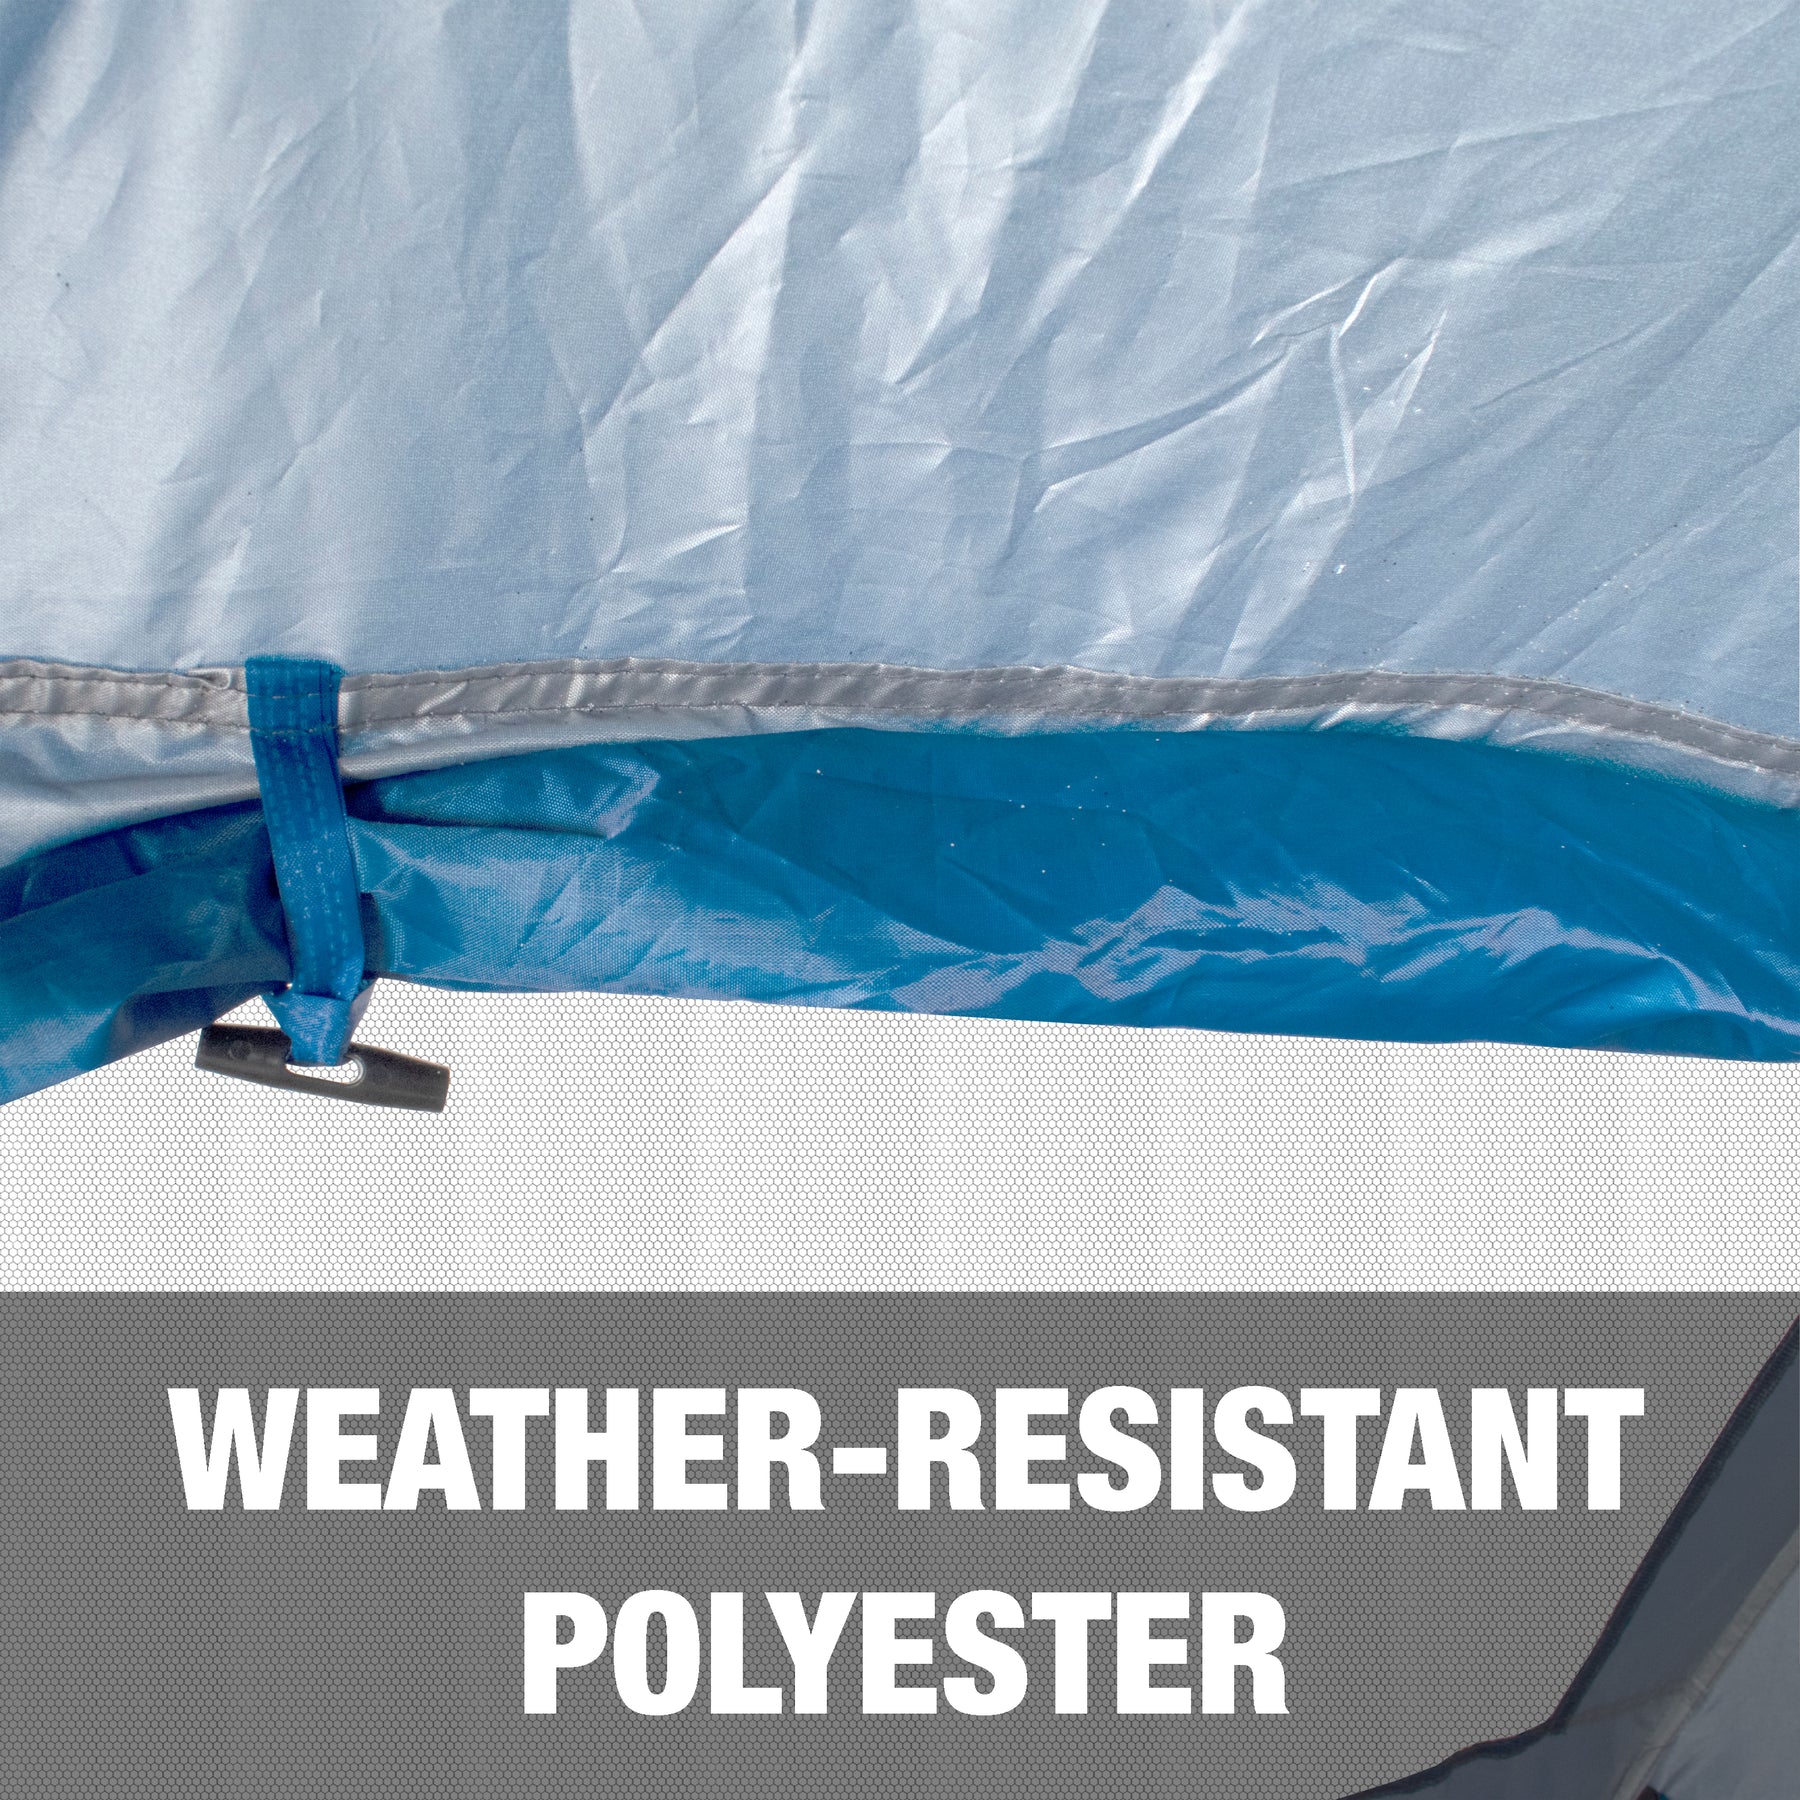 Weather-resistant polyester.